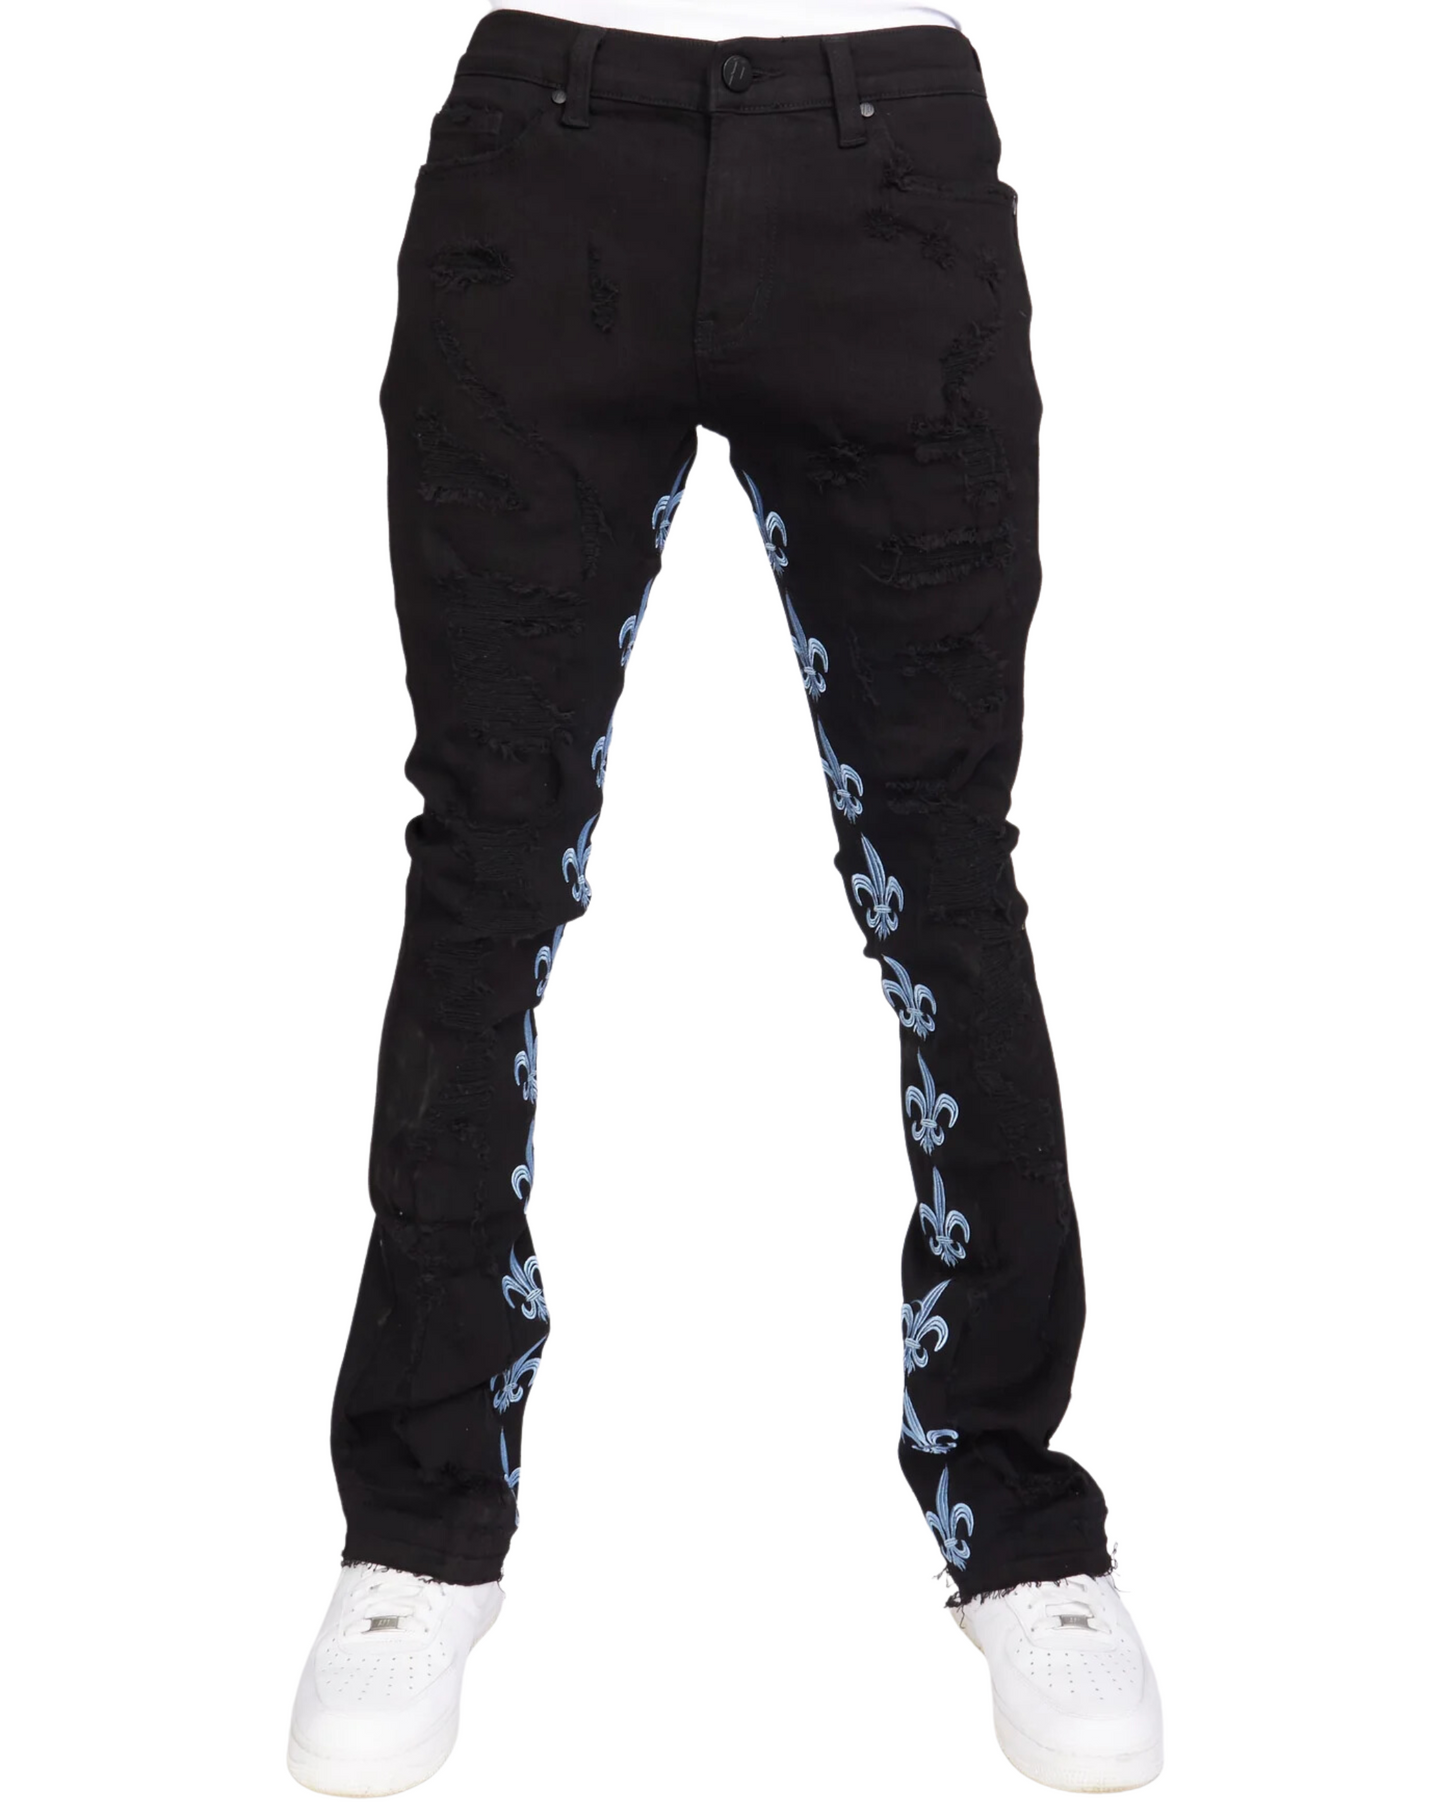 Barkley 506 Embroidery Stacked Jeans